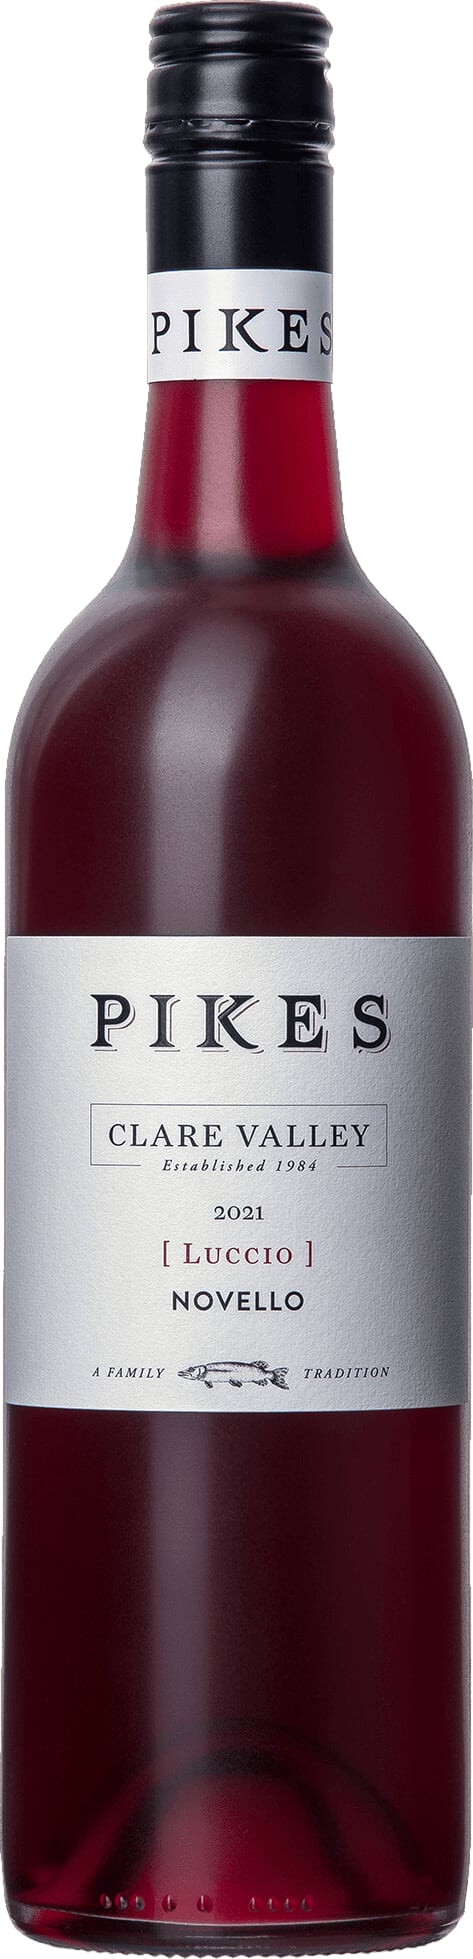 Pikes Luccio Novello 2021 75cl - Buy Pikes Wines from GREAT WINES DIRECT wine shop